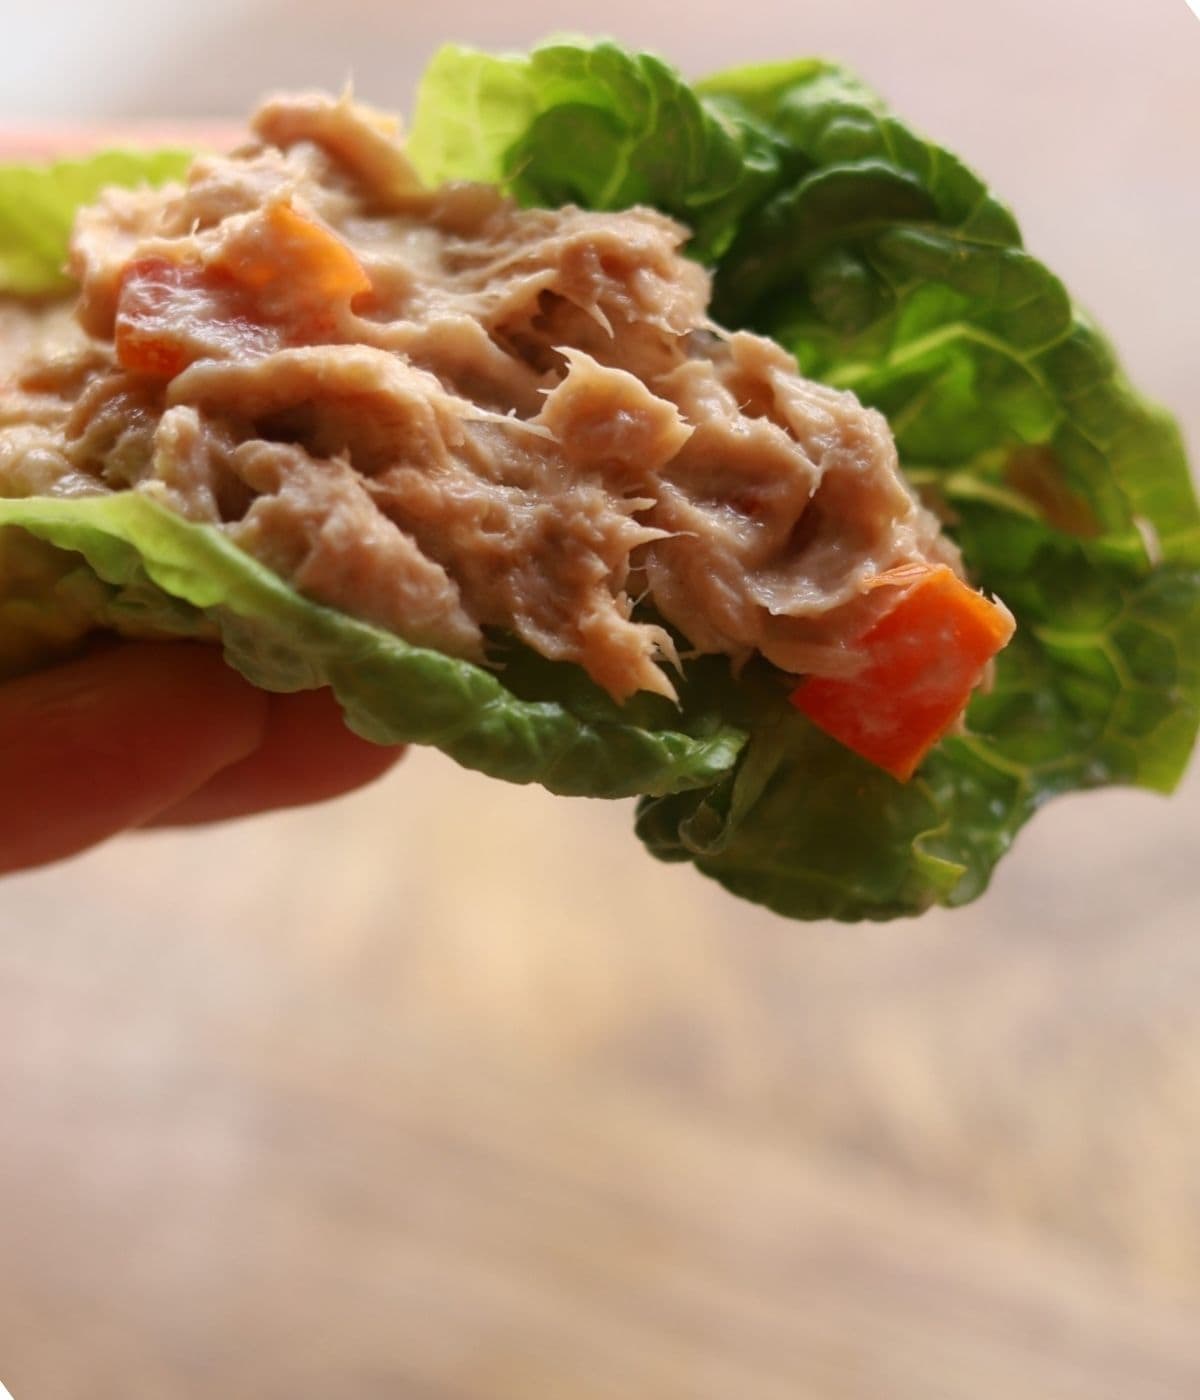 Tuna mix wrapped in lettuce leaf.